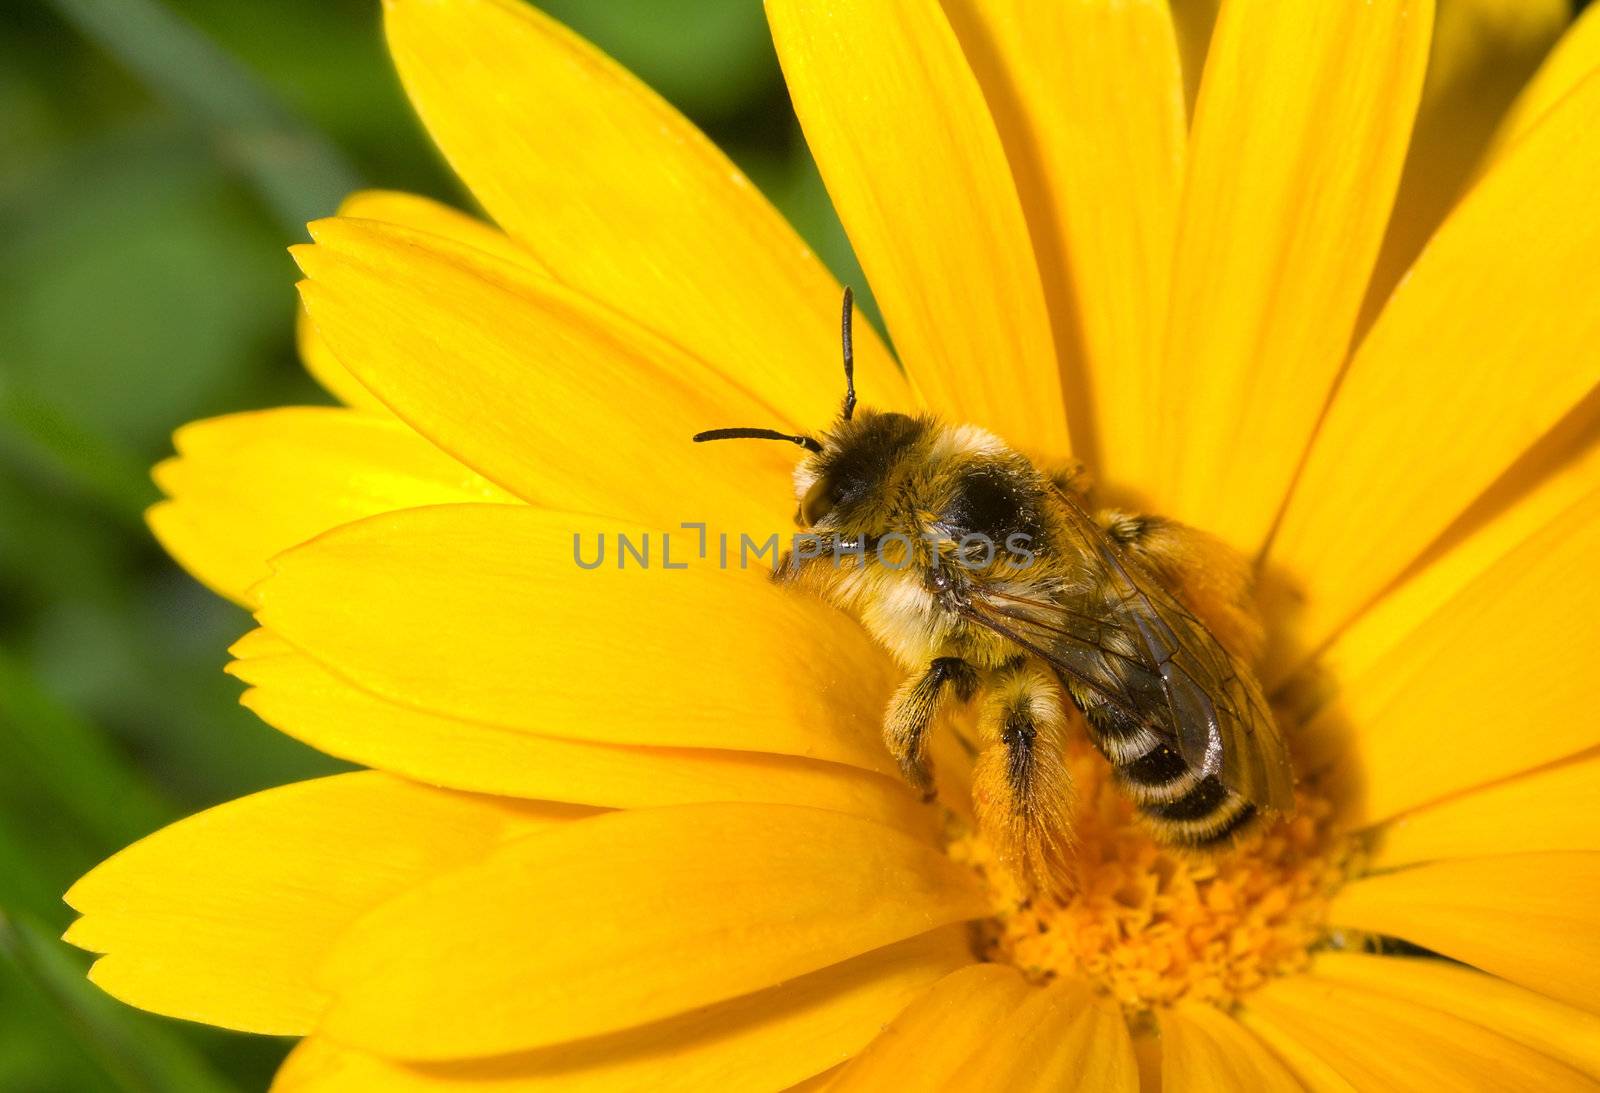 bumblebee on yellow flower by Alekcey